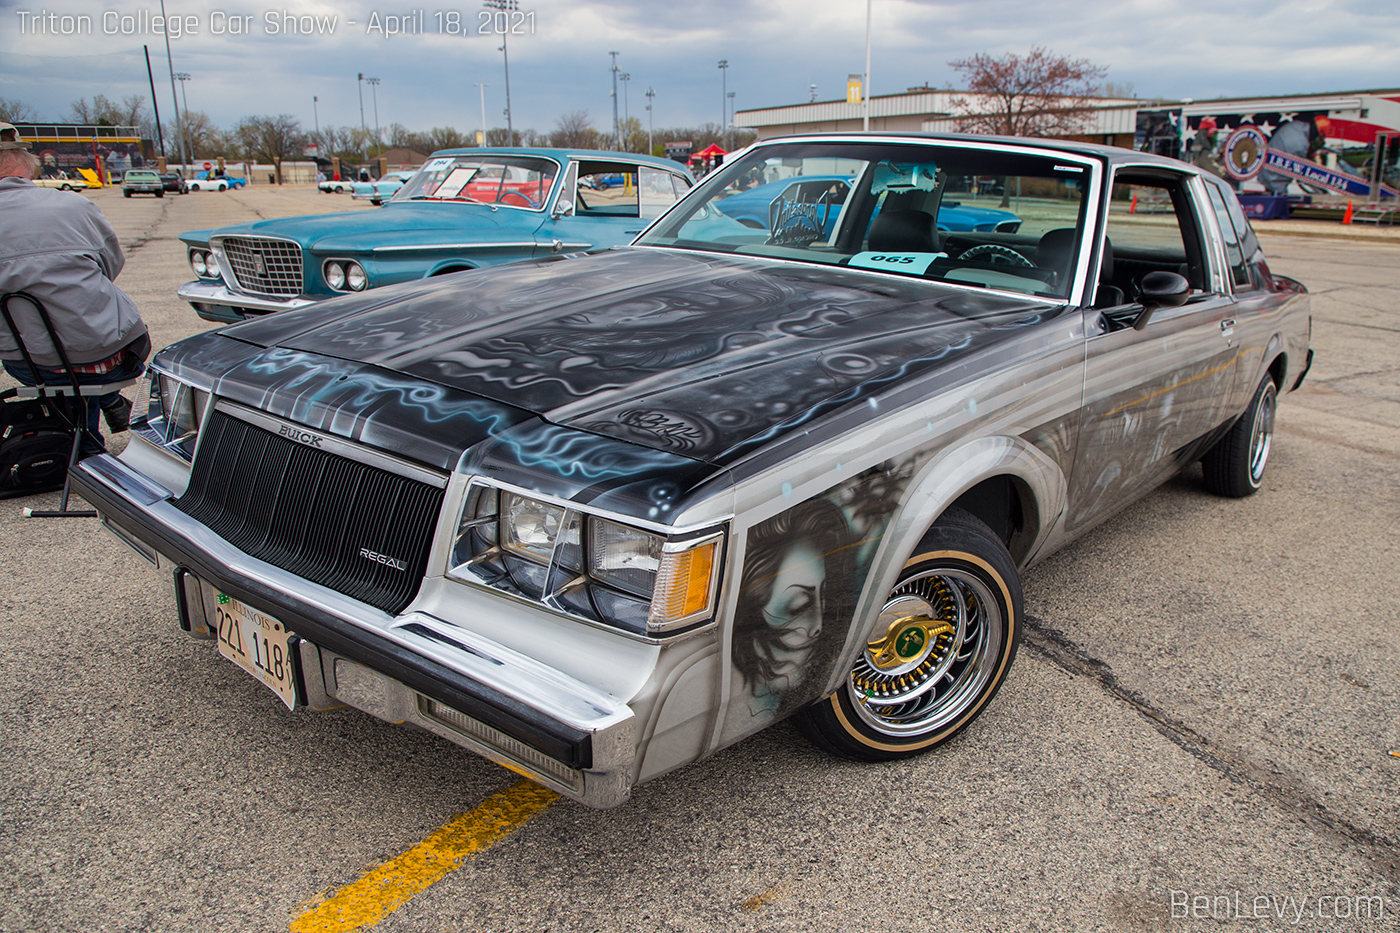 1985 Buick Regal with Airbrushed Art